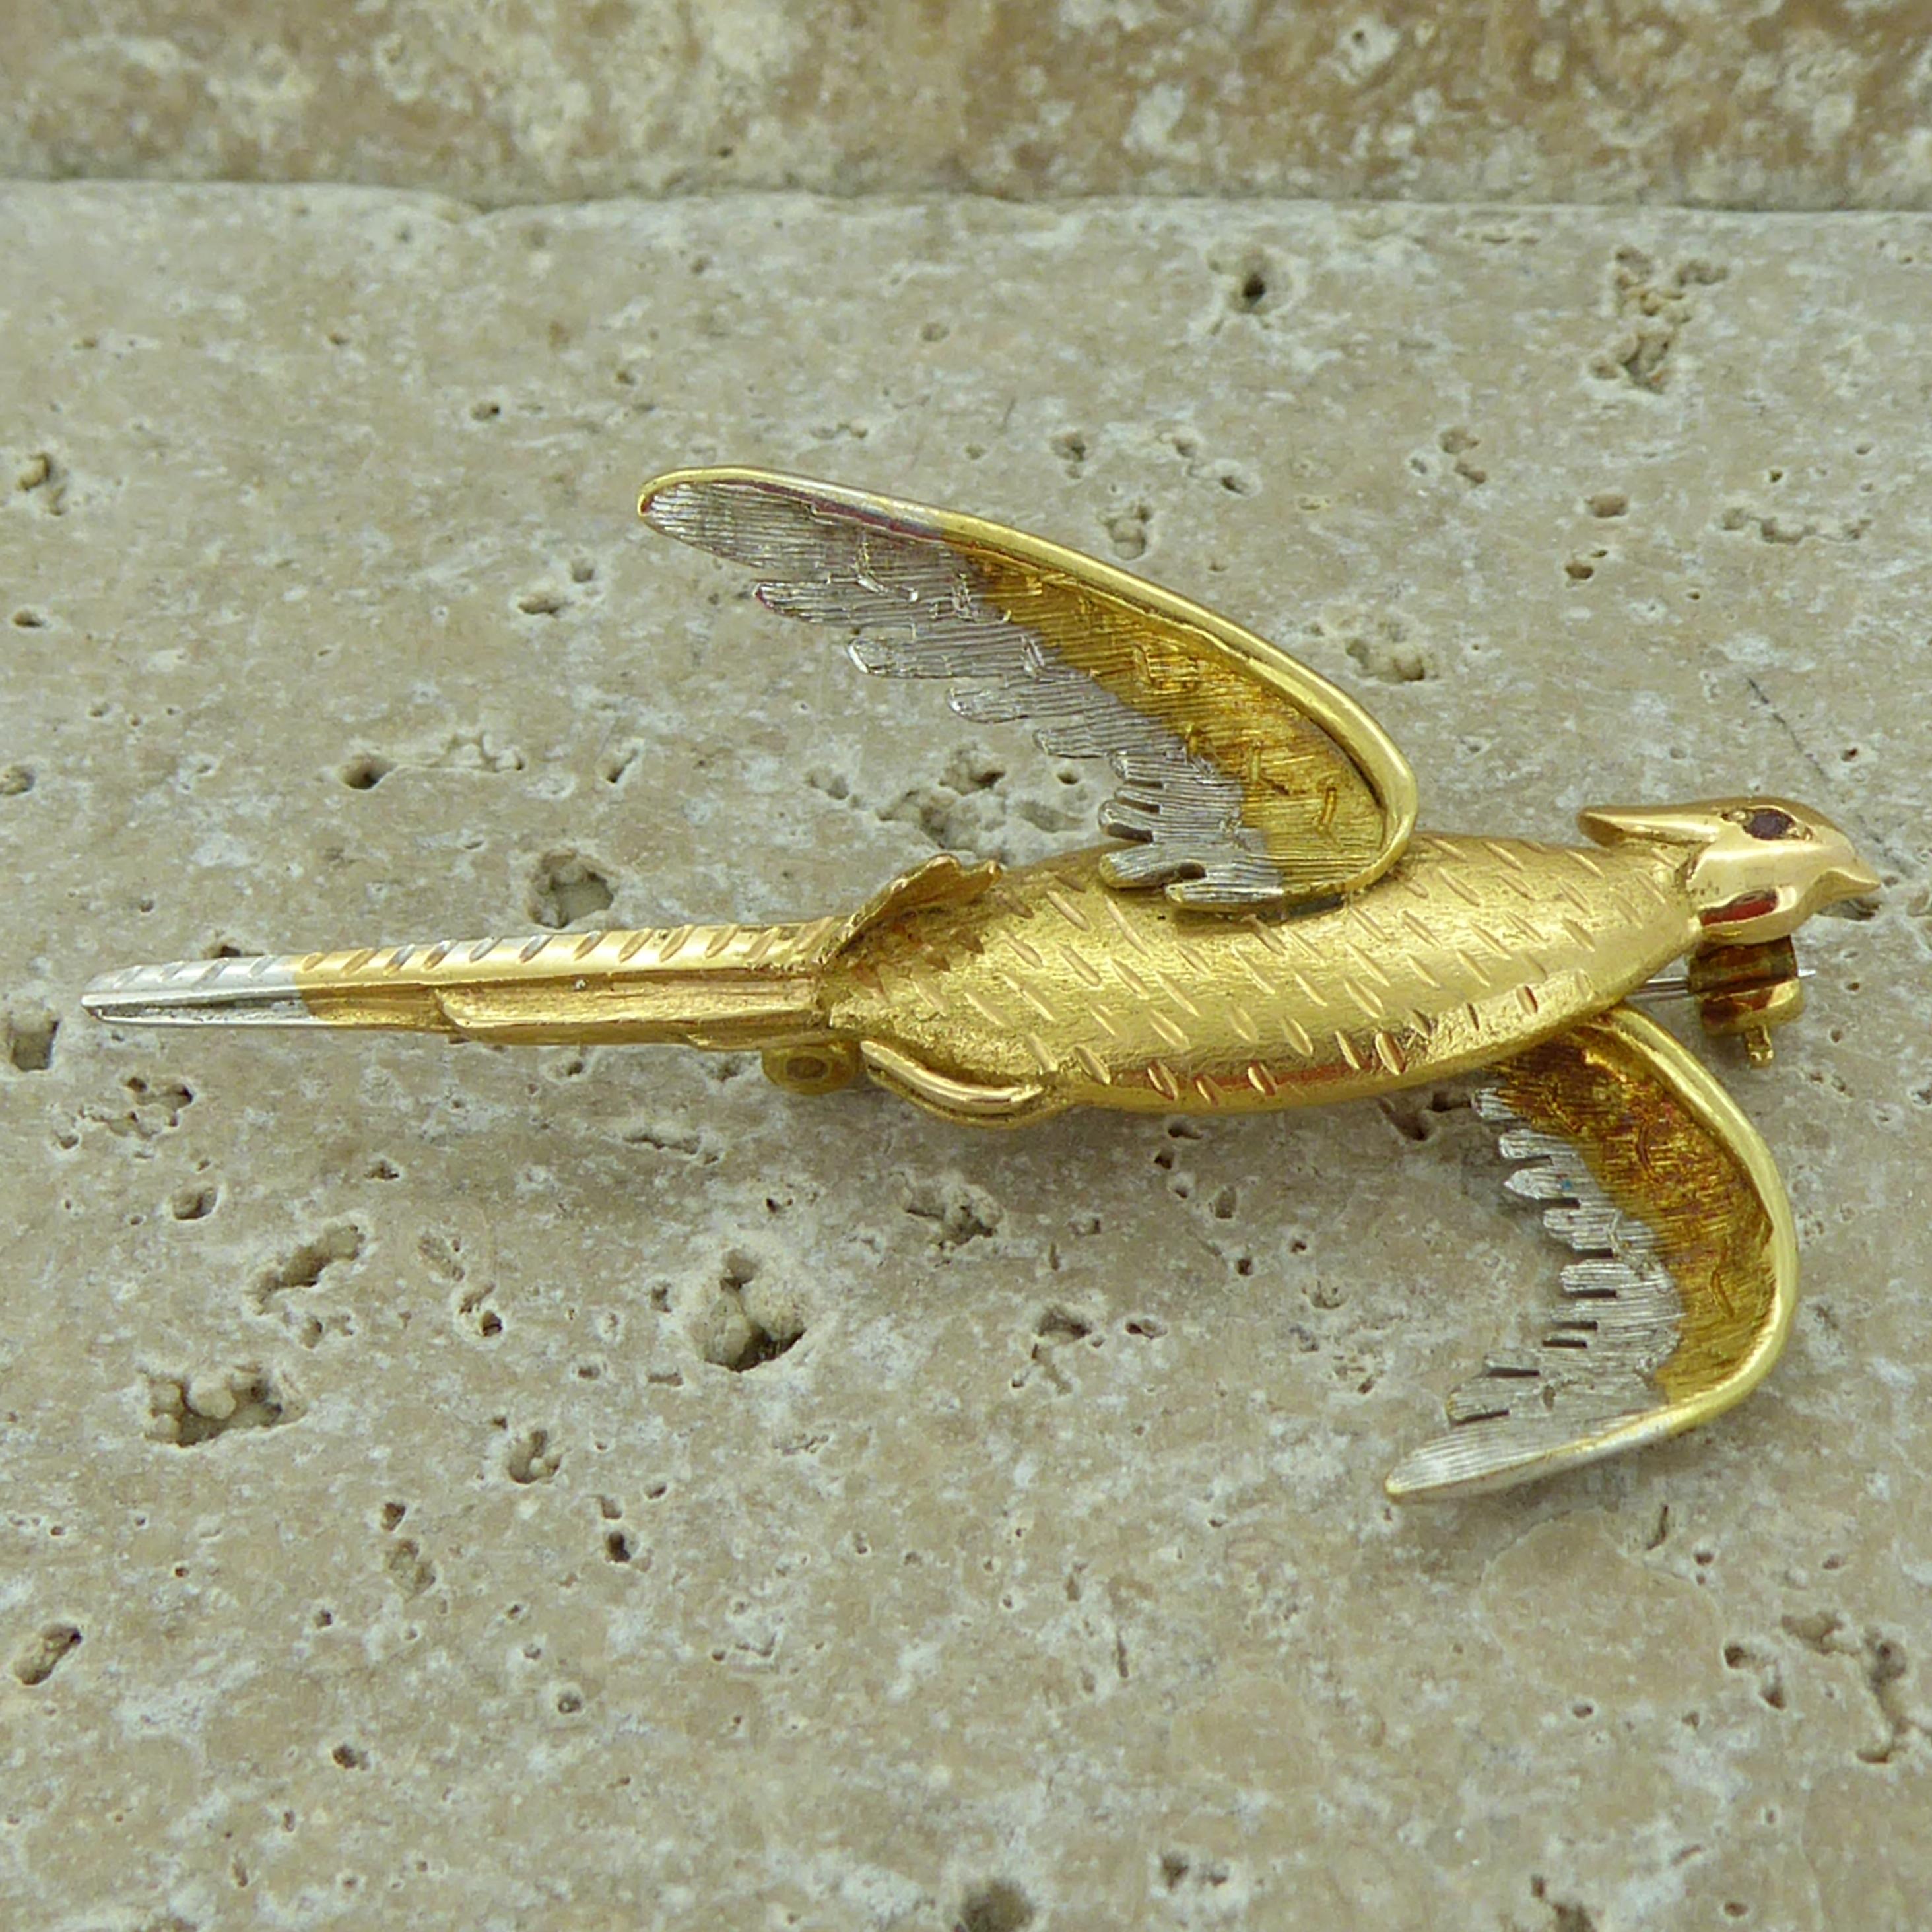 Sporting jewellery was a popular theme in the Victorian era and this is a finely crafted modern sporting brooch depicting a pheasant in flight.  The main body of the pheasant is in 18ct yellow gold with white gold used as an accent on the underside